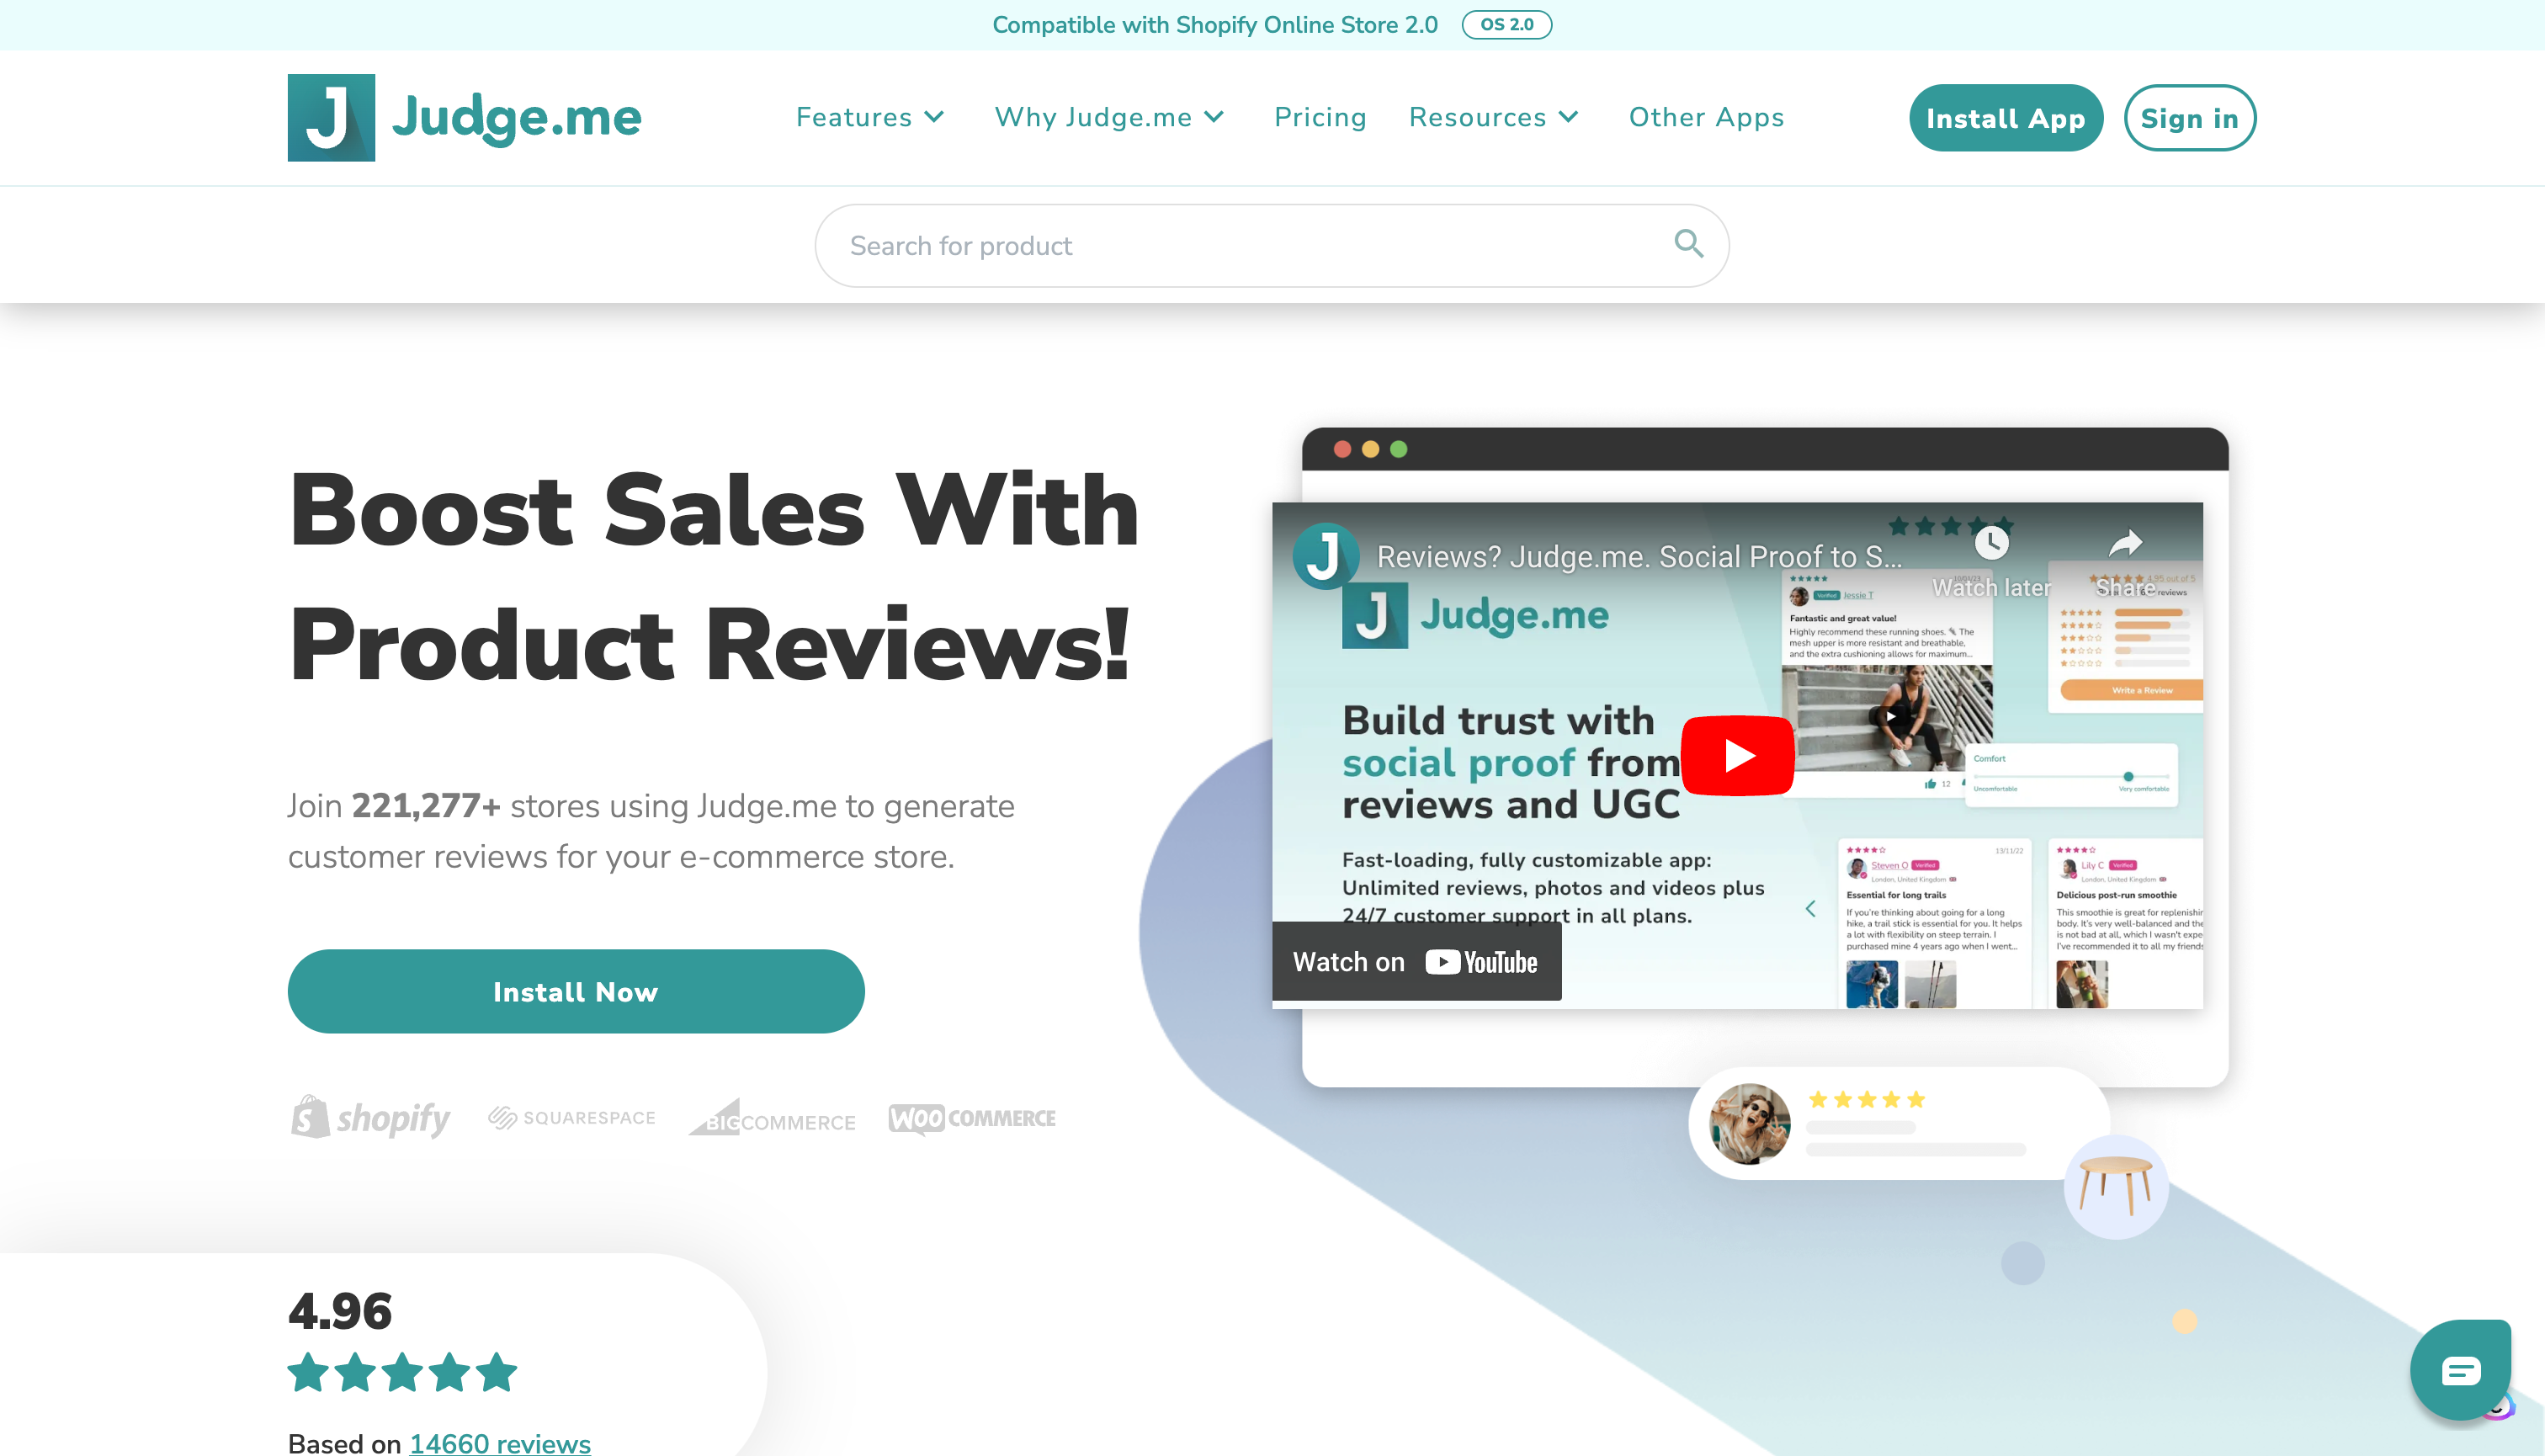 Judge.me - Boost Sales with Product Reviews